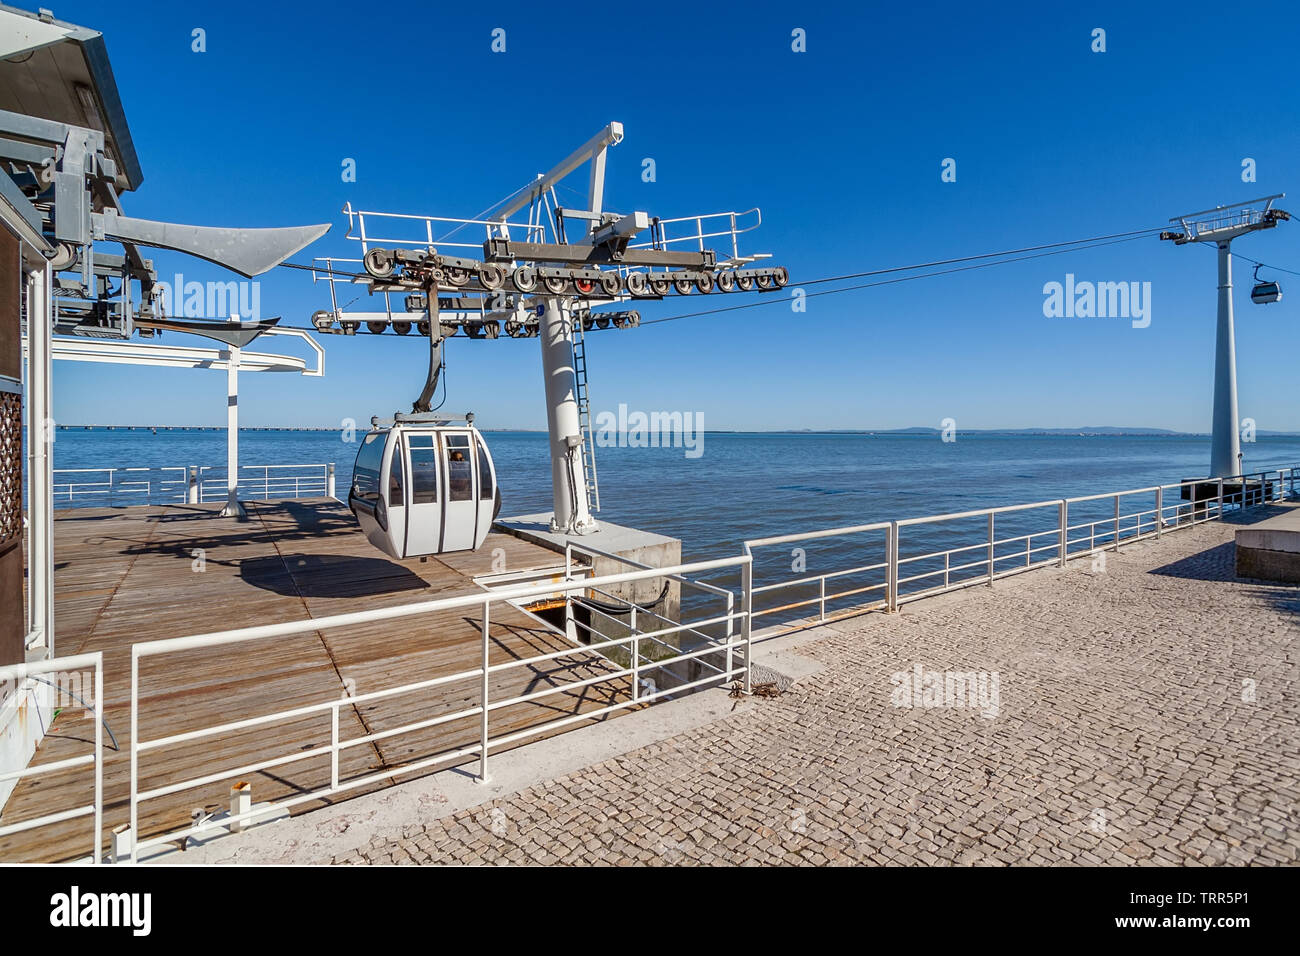 Lisbon, Portugal. Aerial Tramway leaving or entering terminal aka embarking or docking station, Parque das Nacoes aka Nations Park with Tagus River Stock Photo